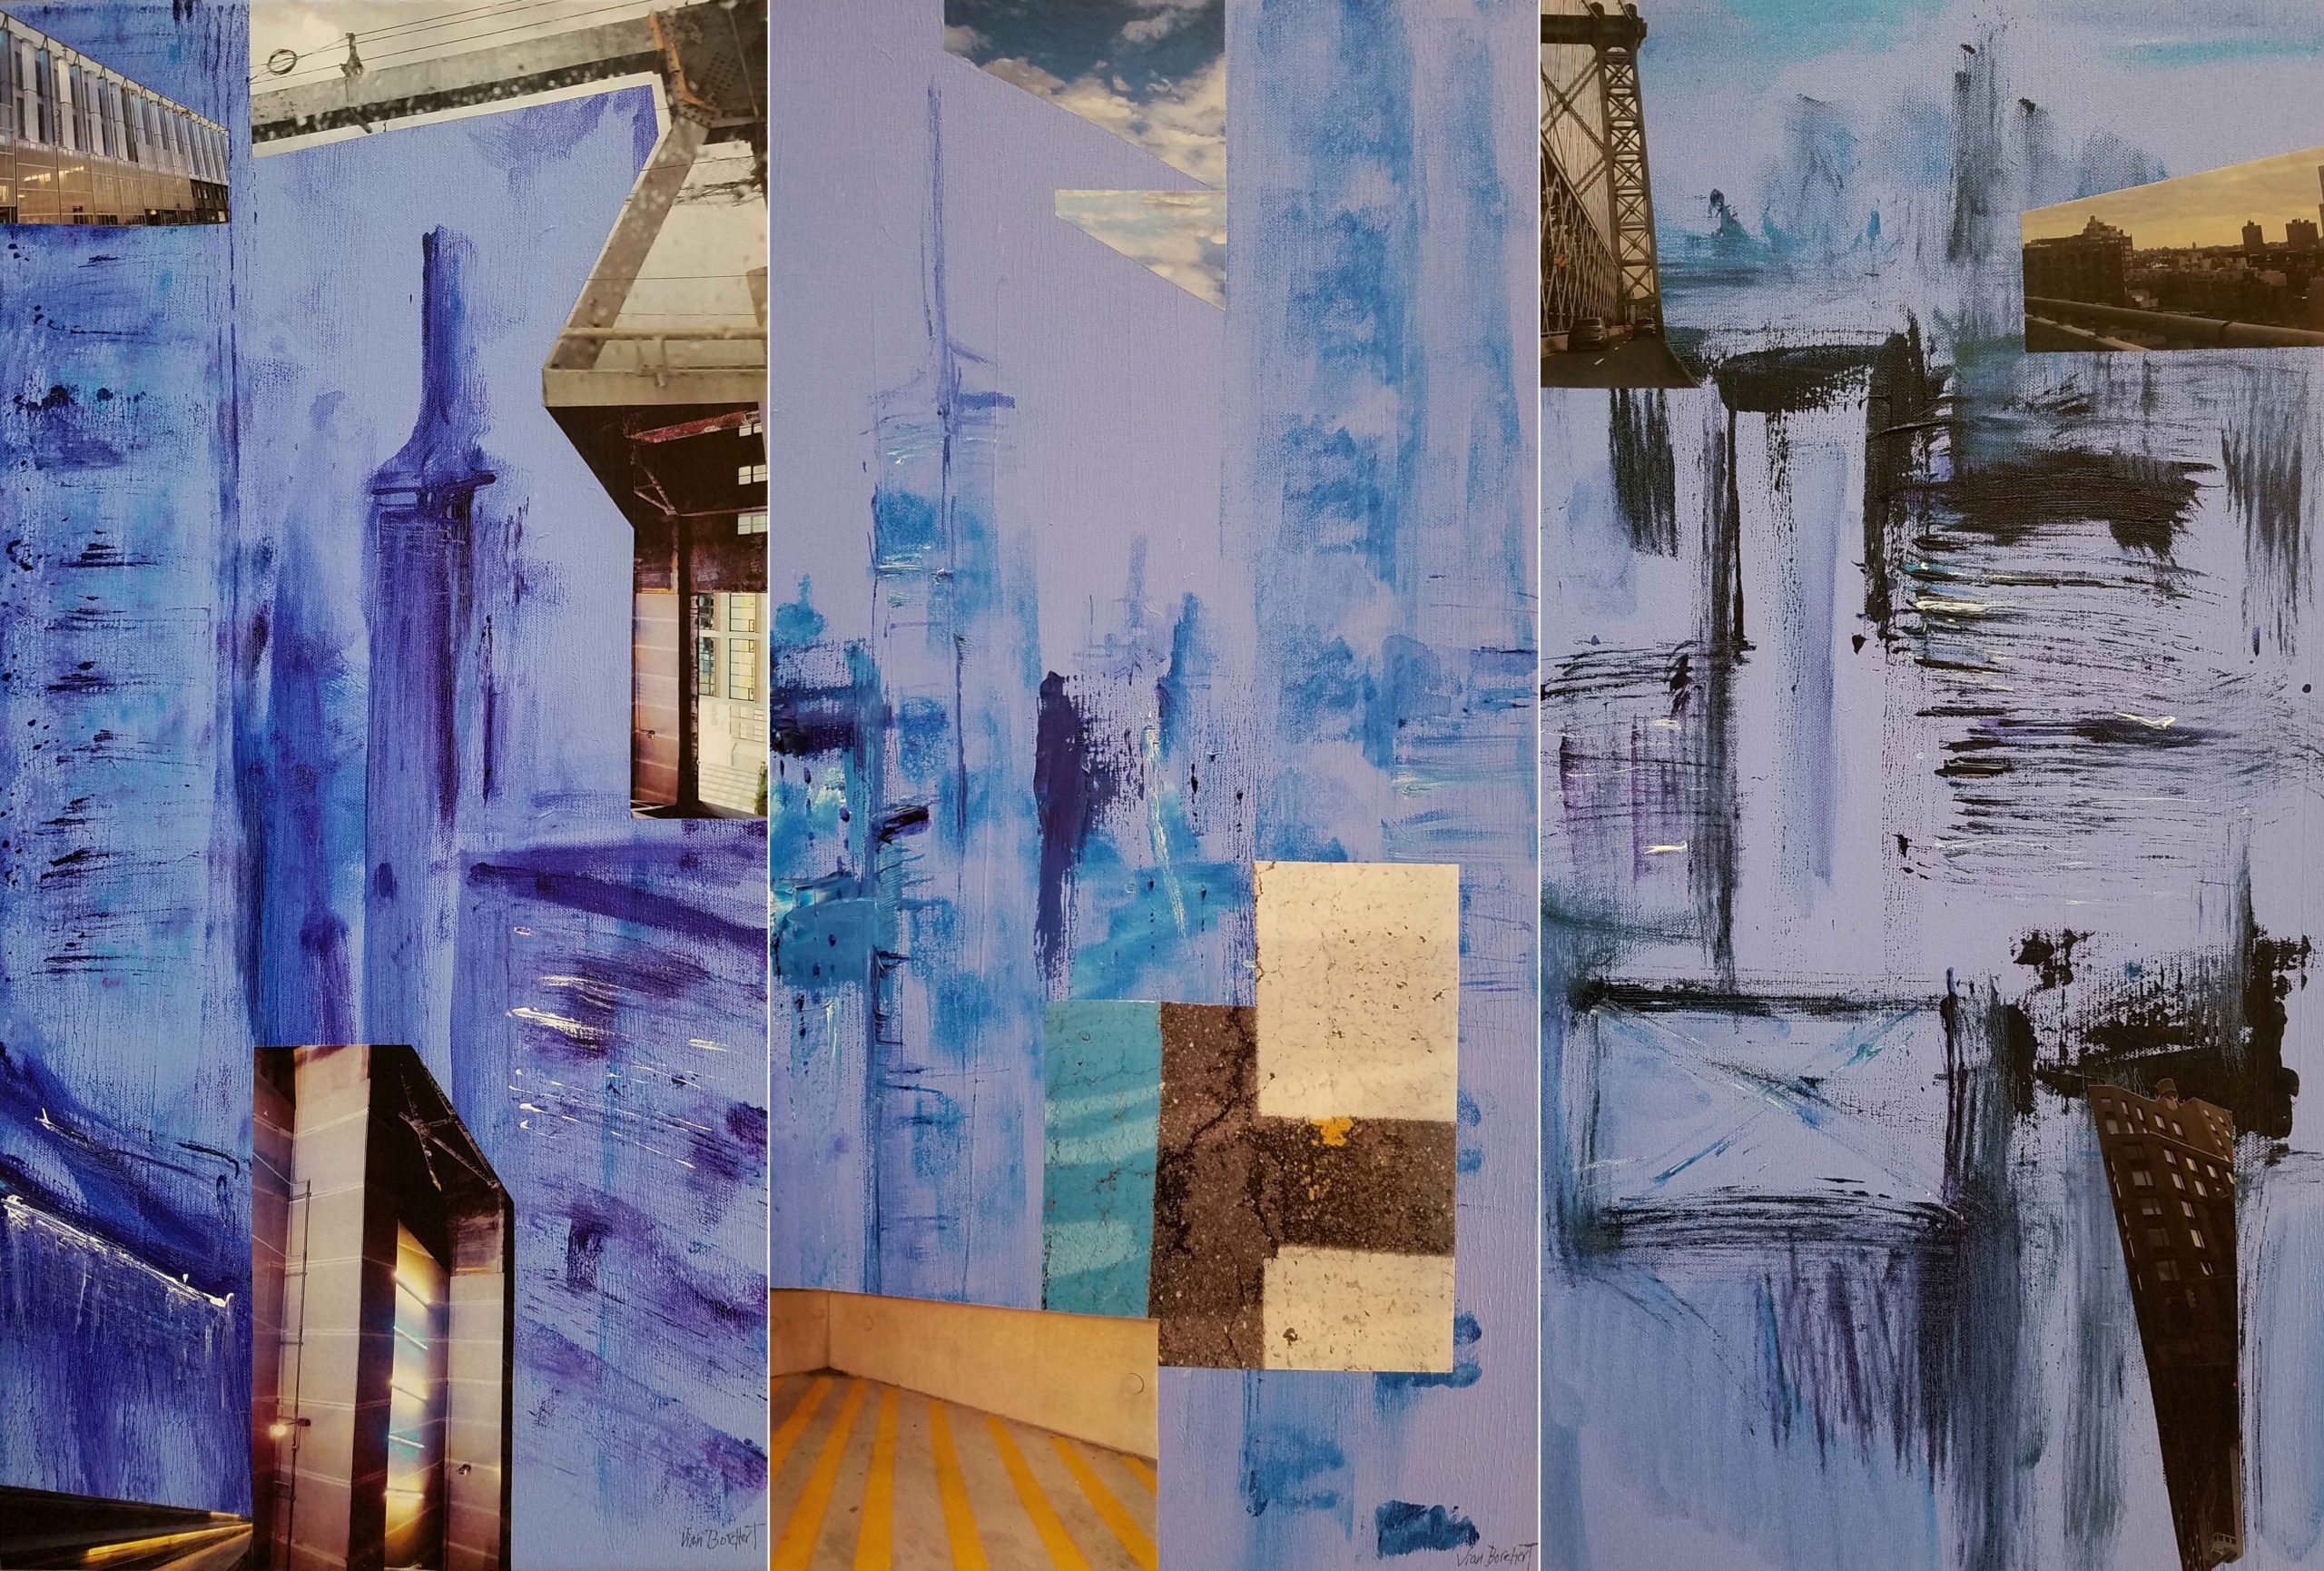 Vian Borchert’s Cityscape Paintings at Lichtundfire’s “RESHUFFLE” Show